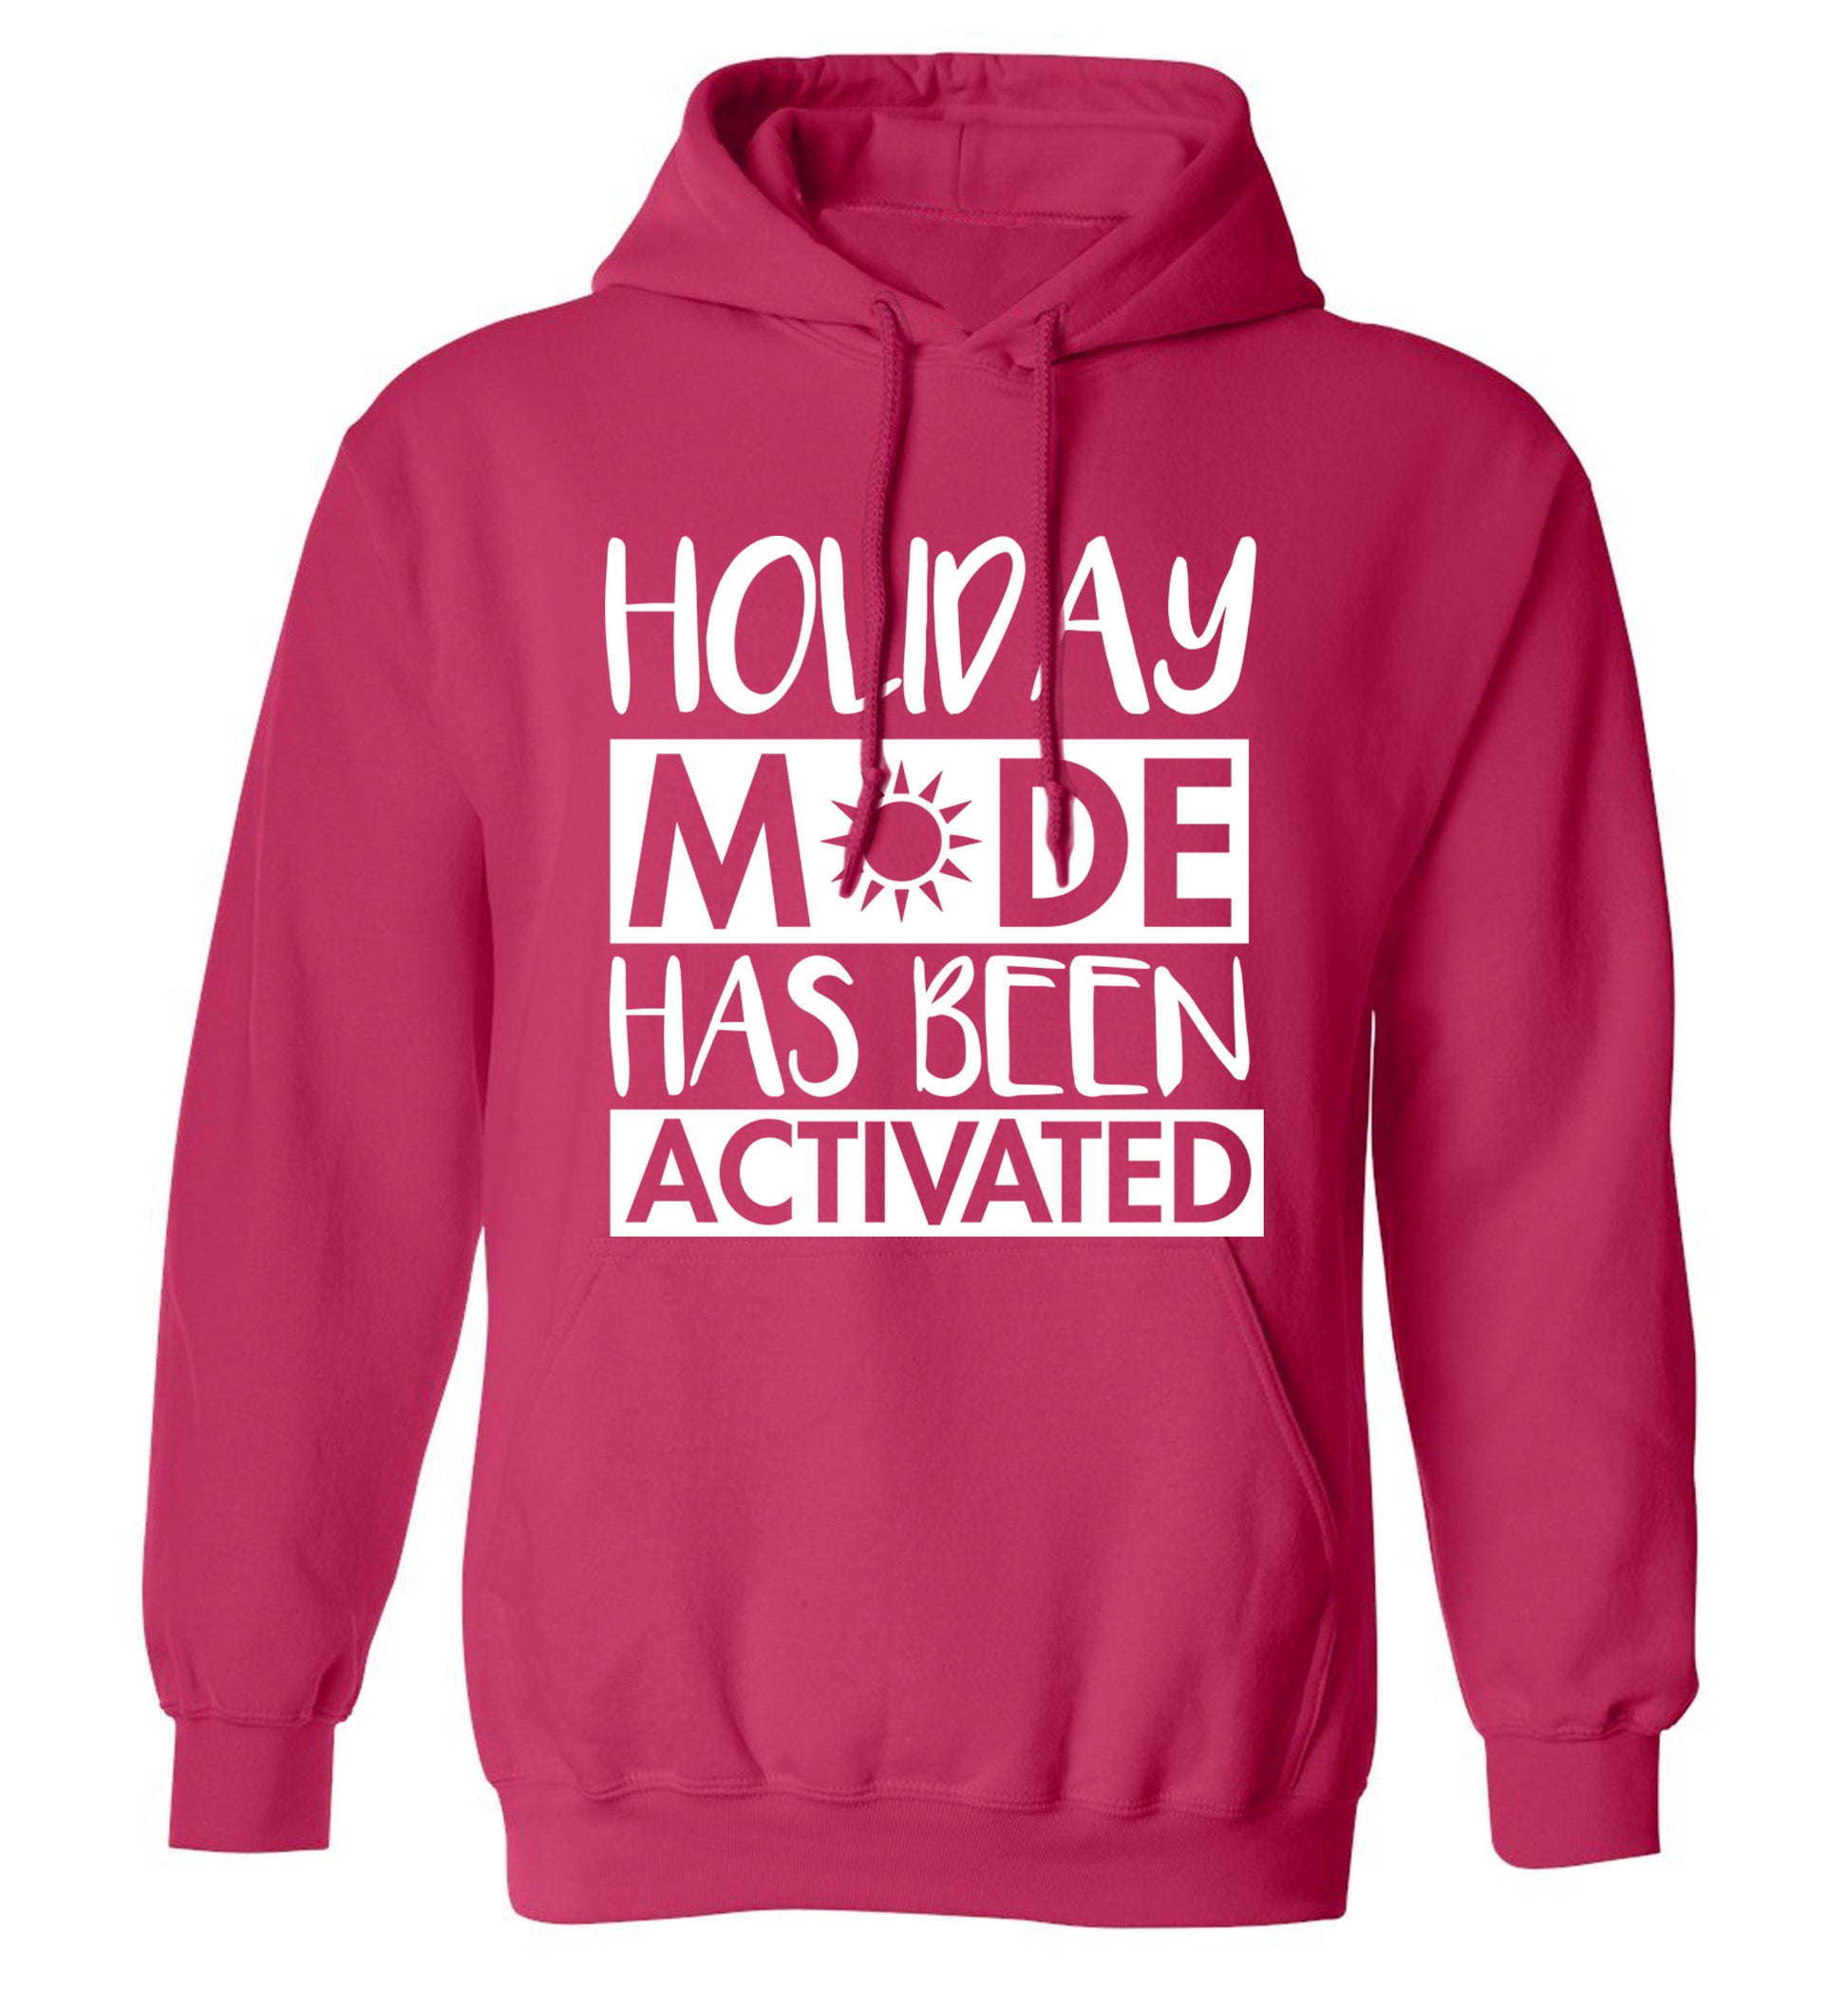 Holiday mode has been activated adults unisex pink hoodie 2XL